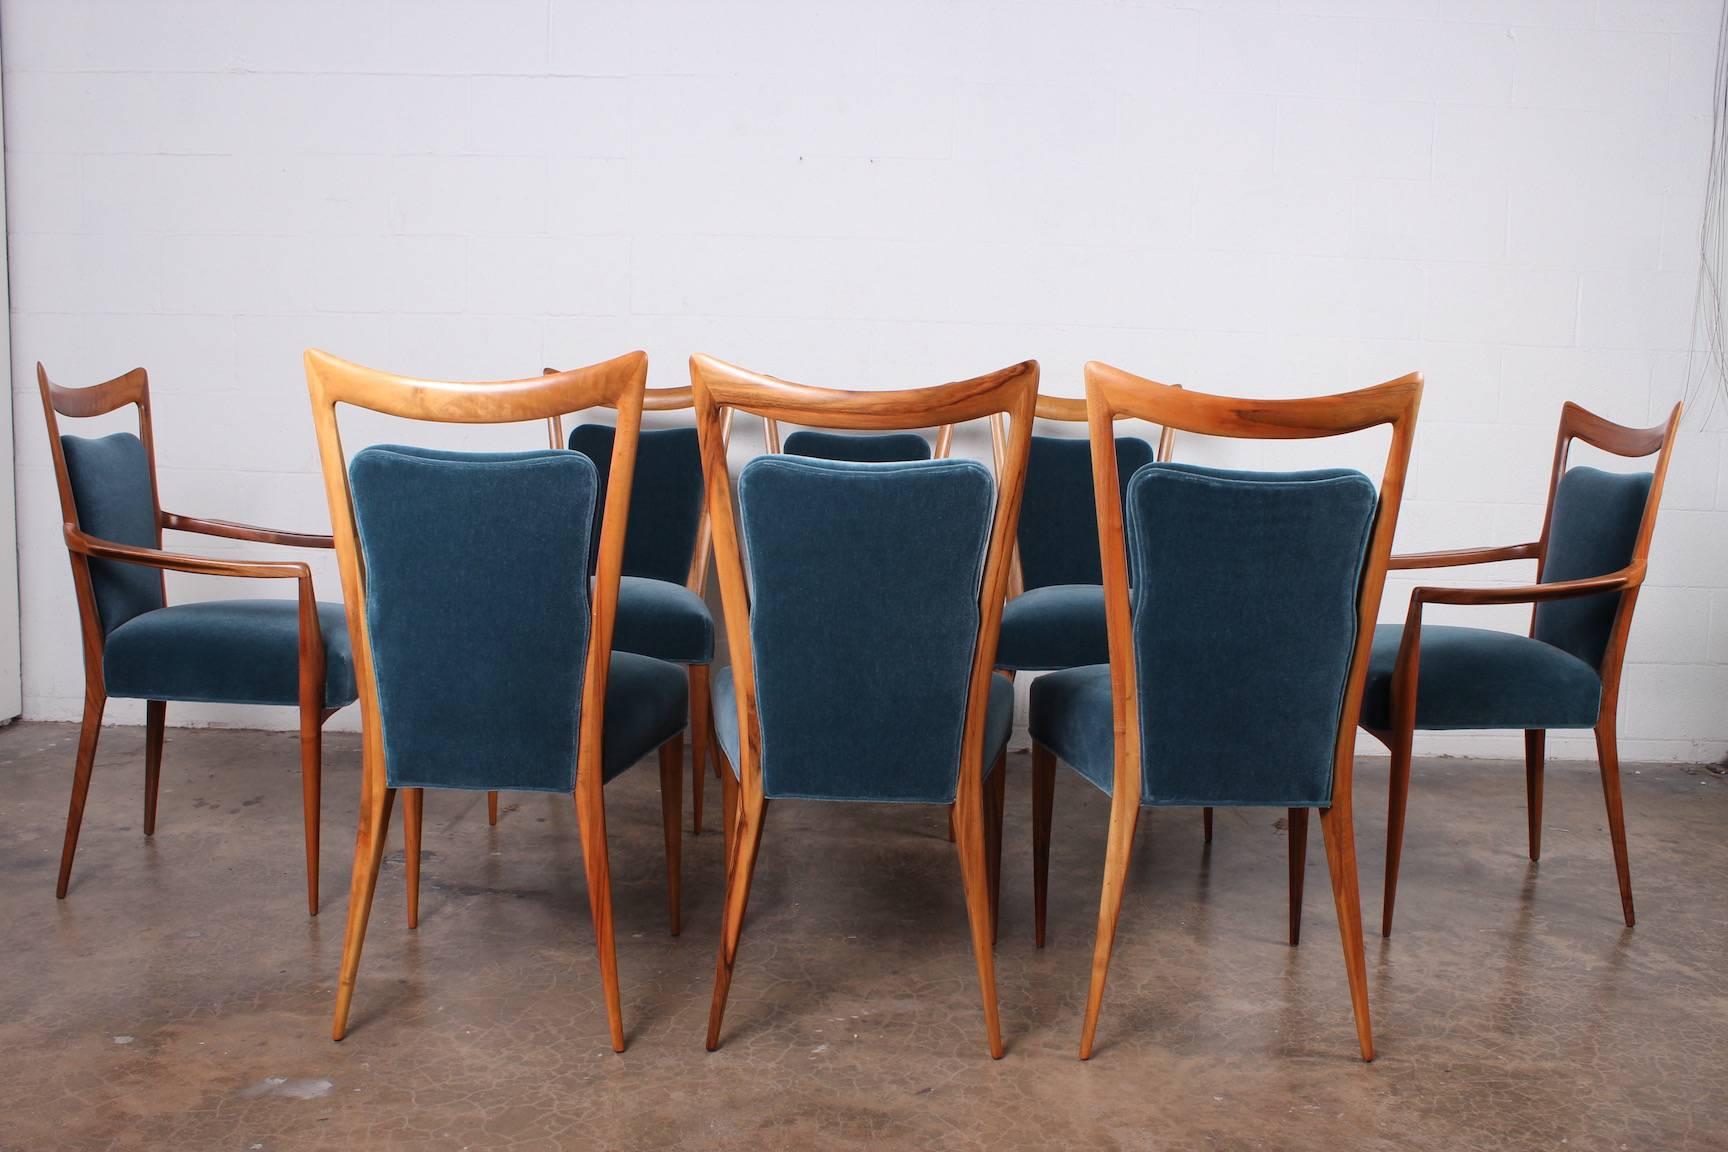 A set of eight sculptural dining chairs with mohair upholstery. Designed by Melchiorre Bega.